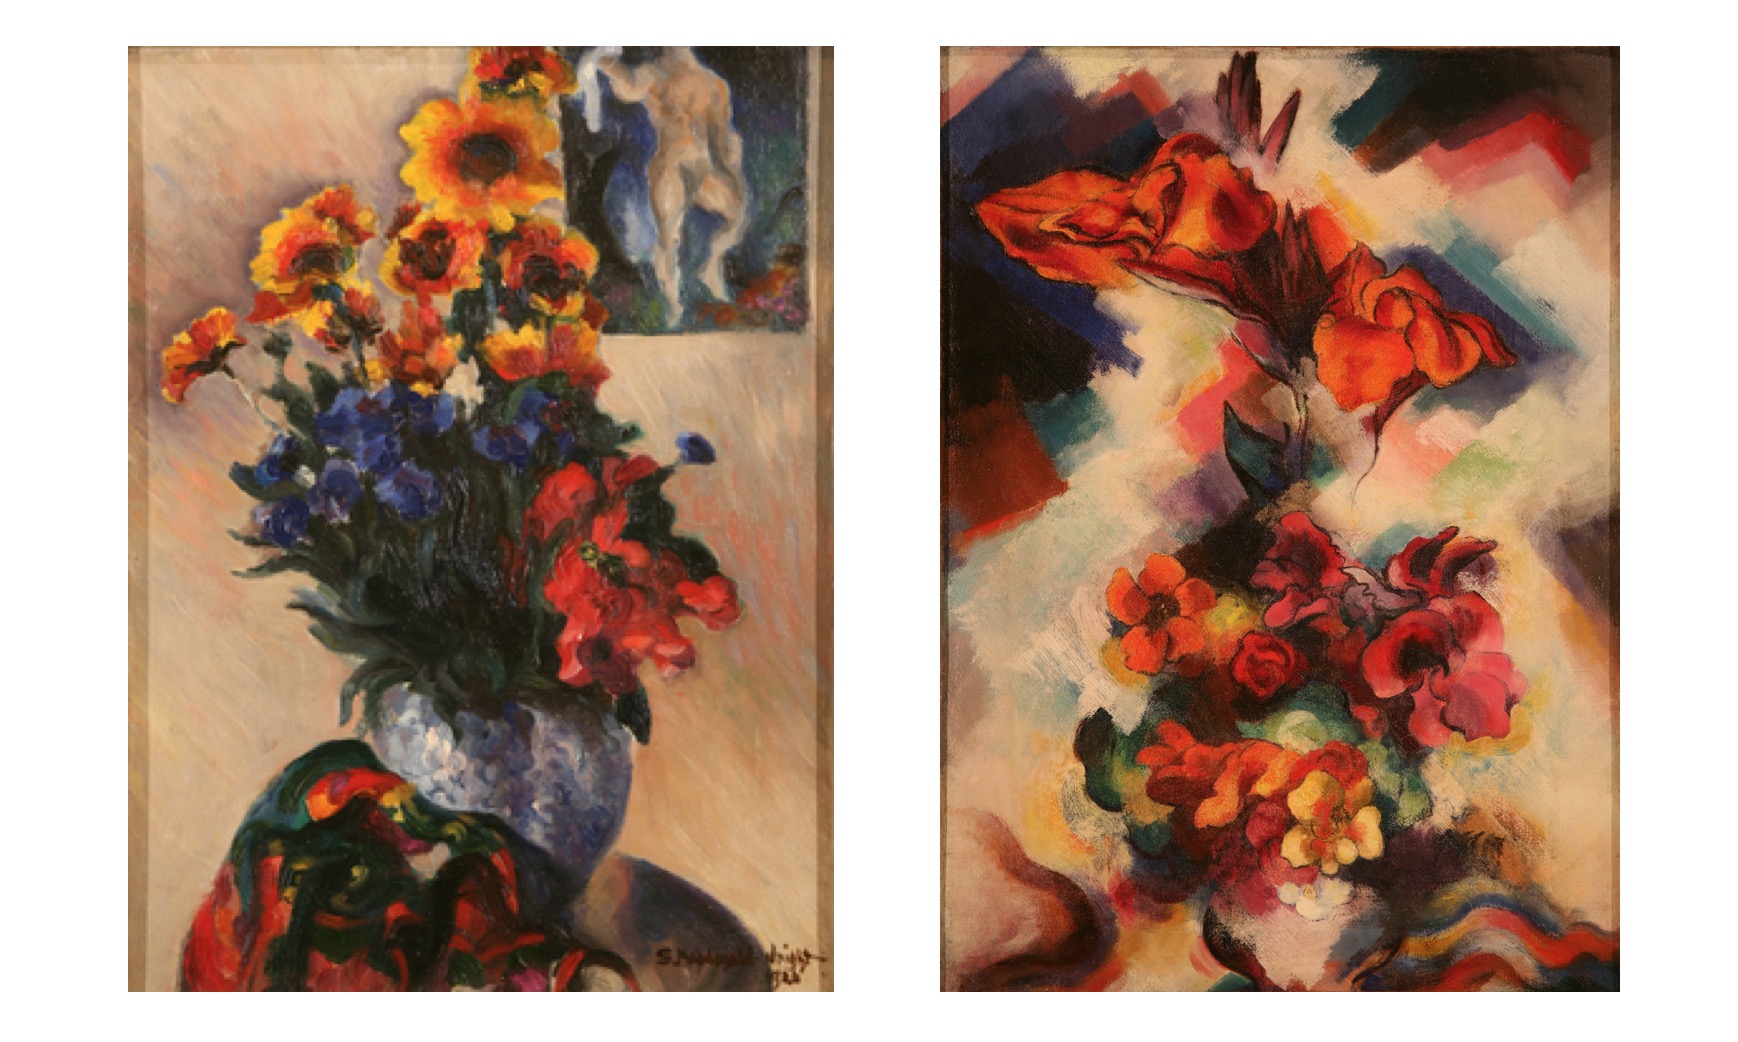 Image of artwork Untitled (Vase of Flowers) by Stanton Macdonald-Wright